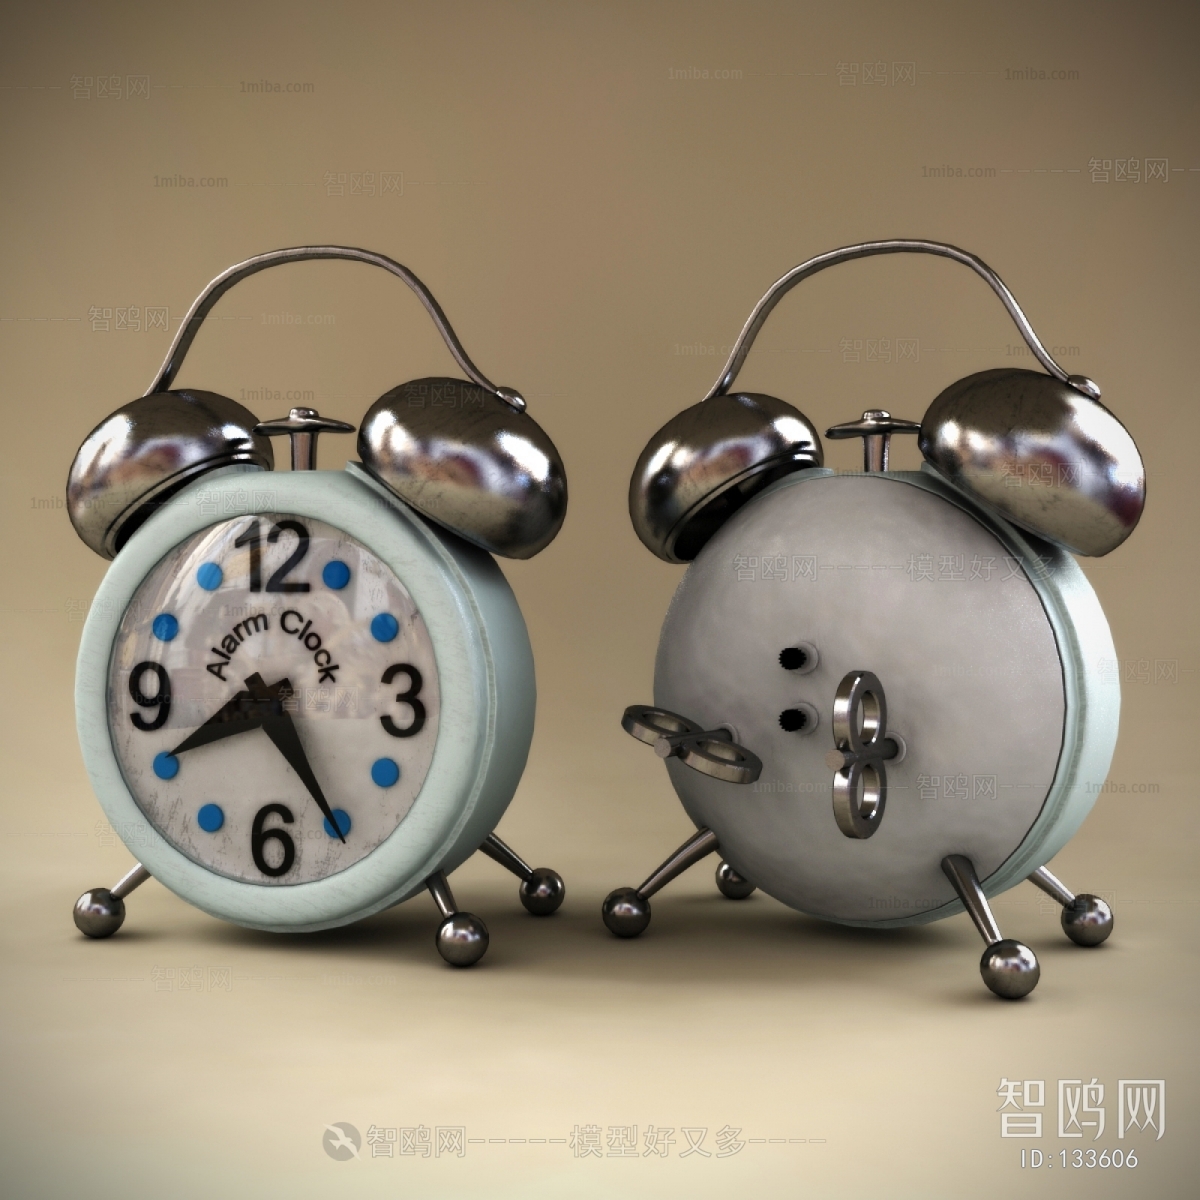 Modern Clocks And Watches